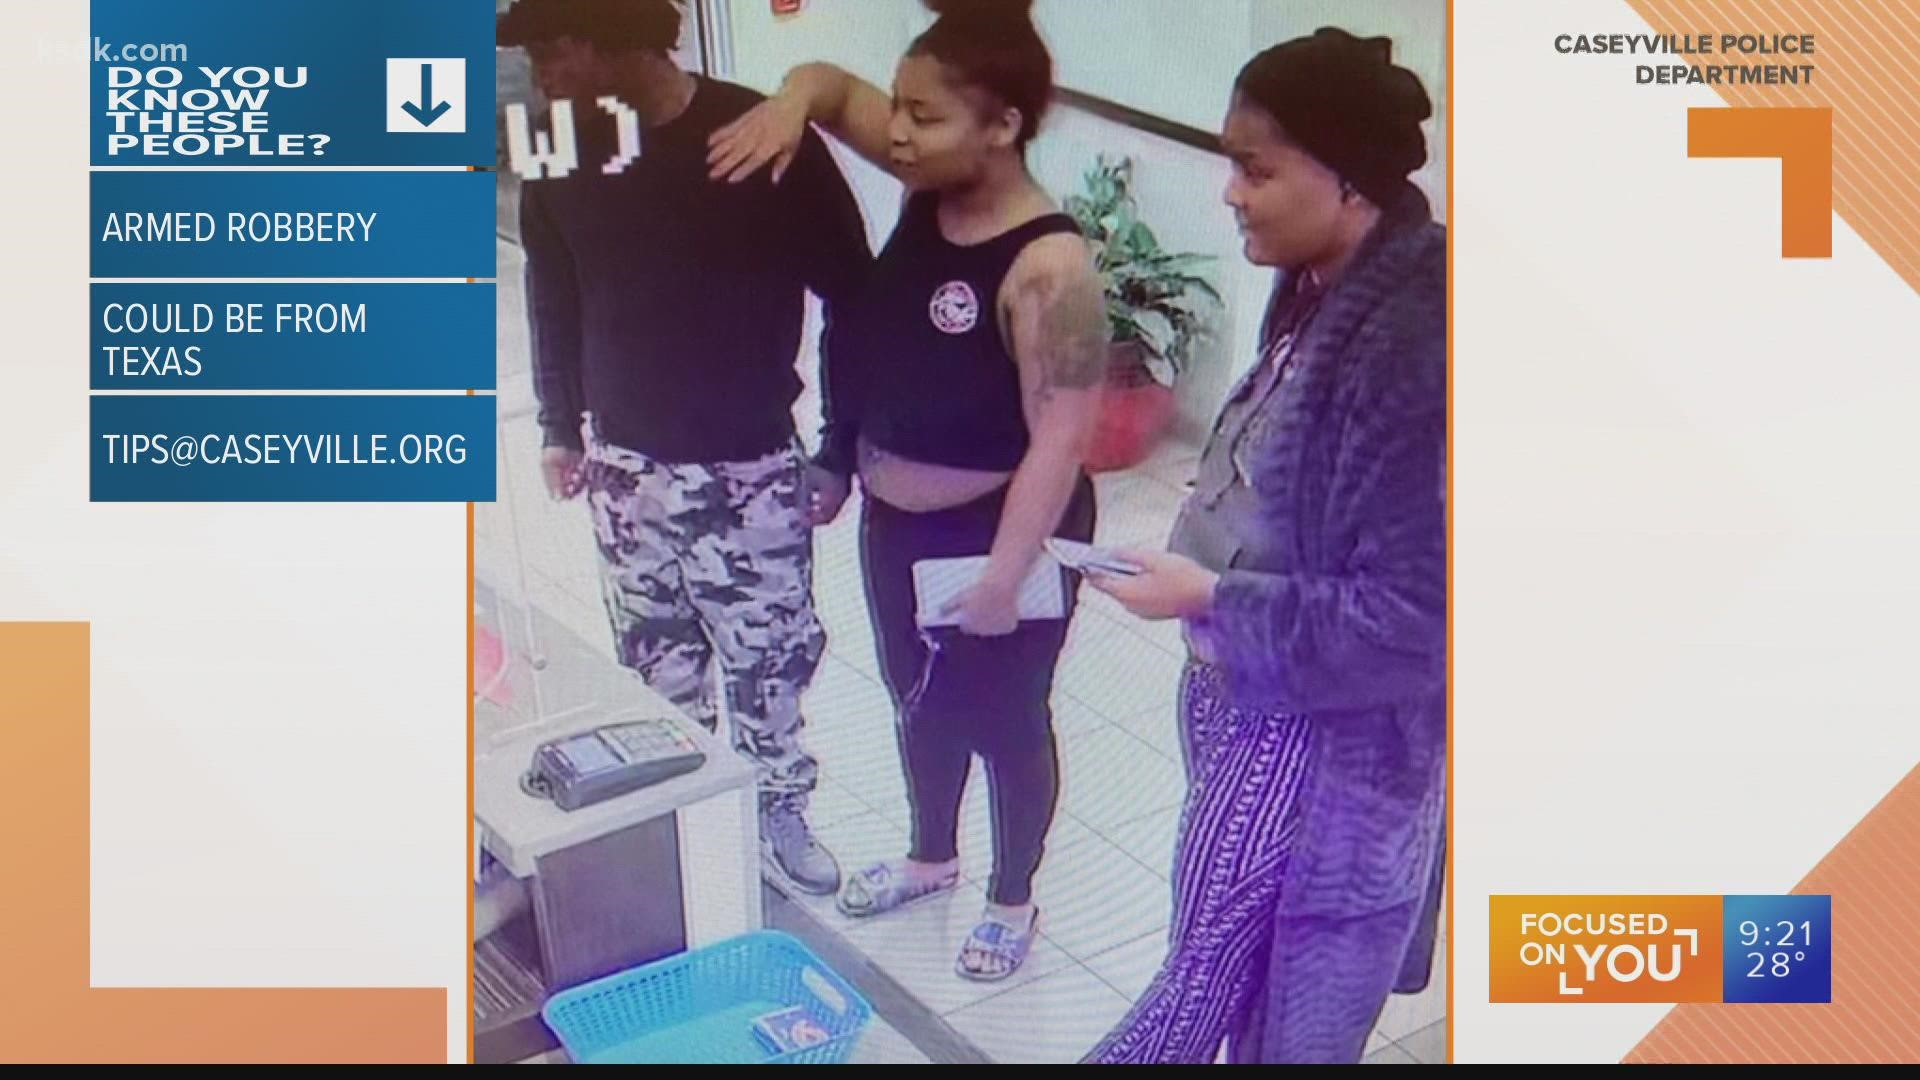 Three people are wanted in connection to a crime in Caseyville. Police say they are linked to an armed robbery at a Motel 6.